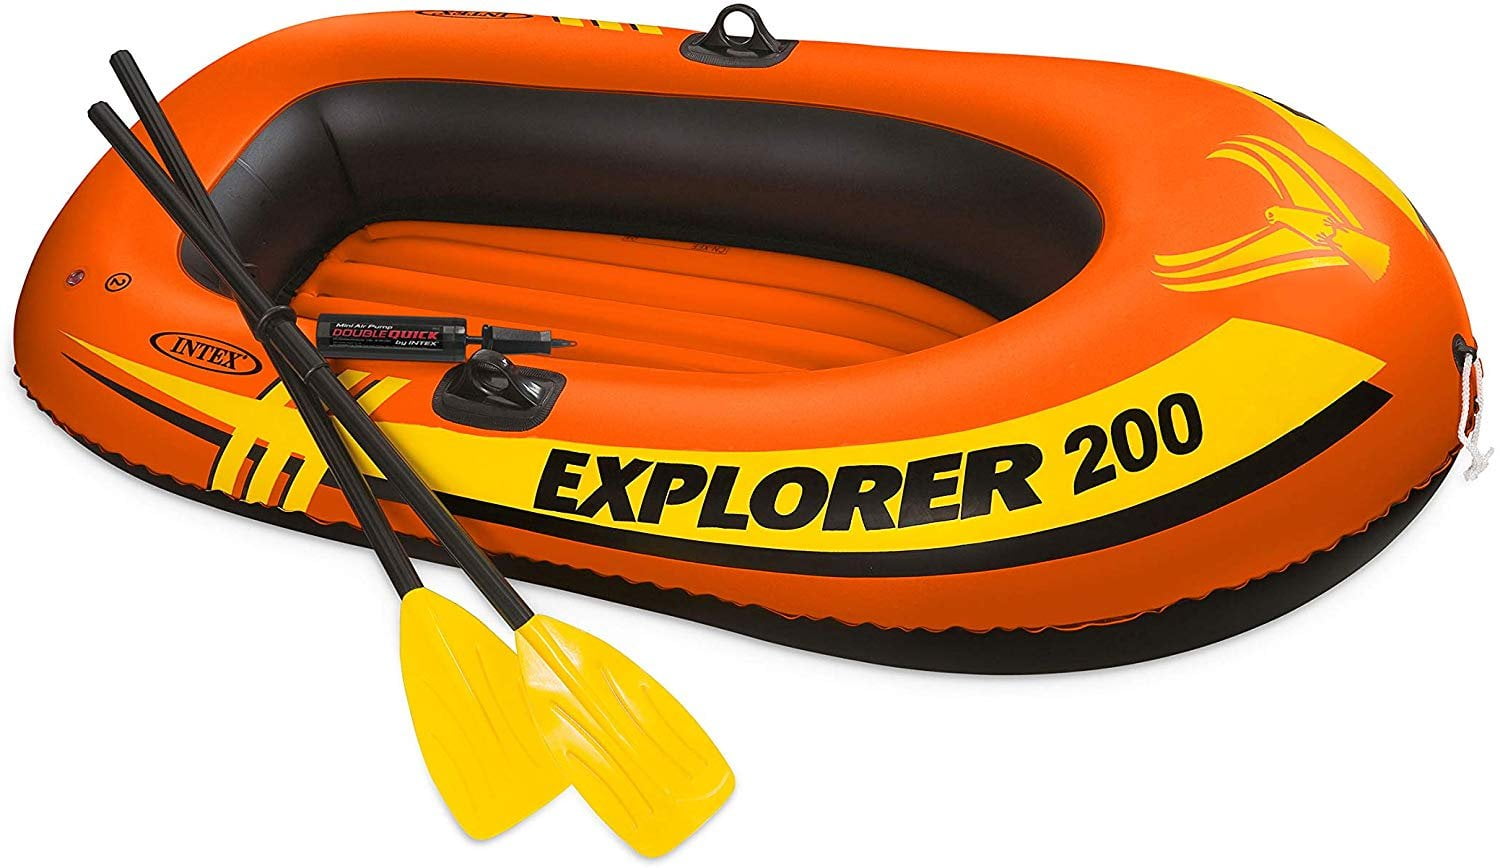 Intex Explorer 200 2 Person Inflatable Boat for sale online 